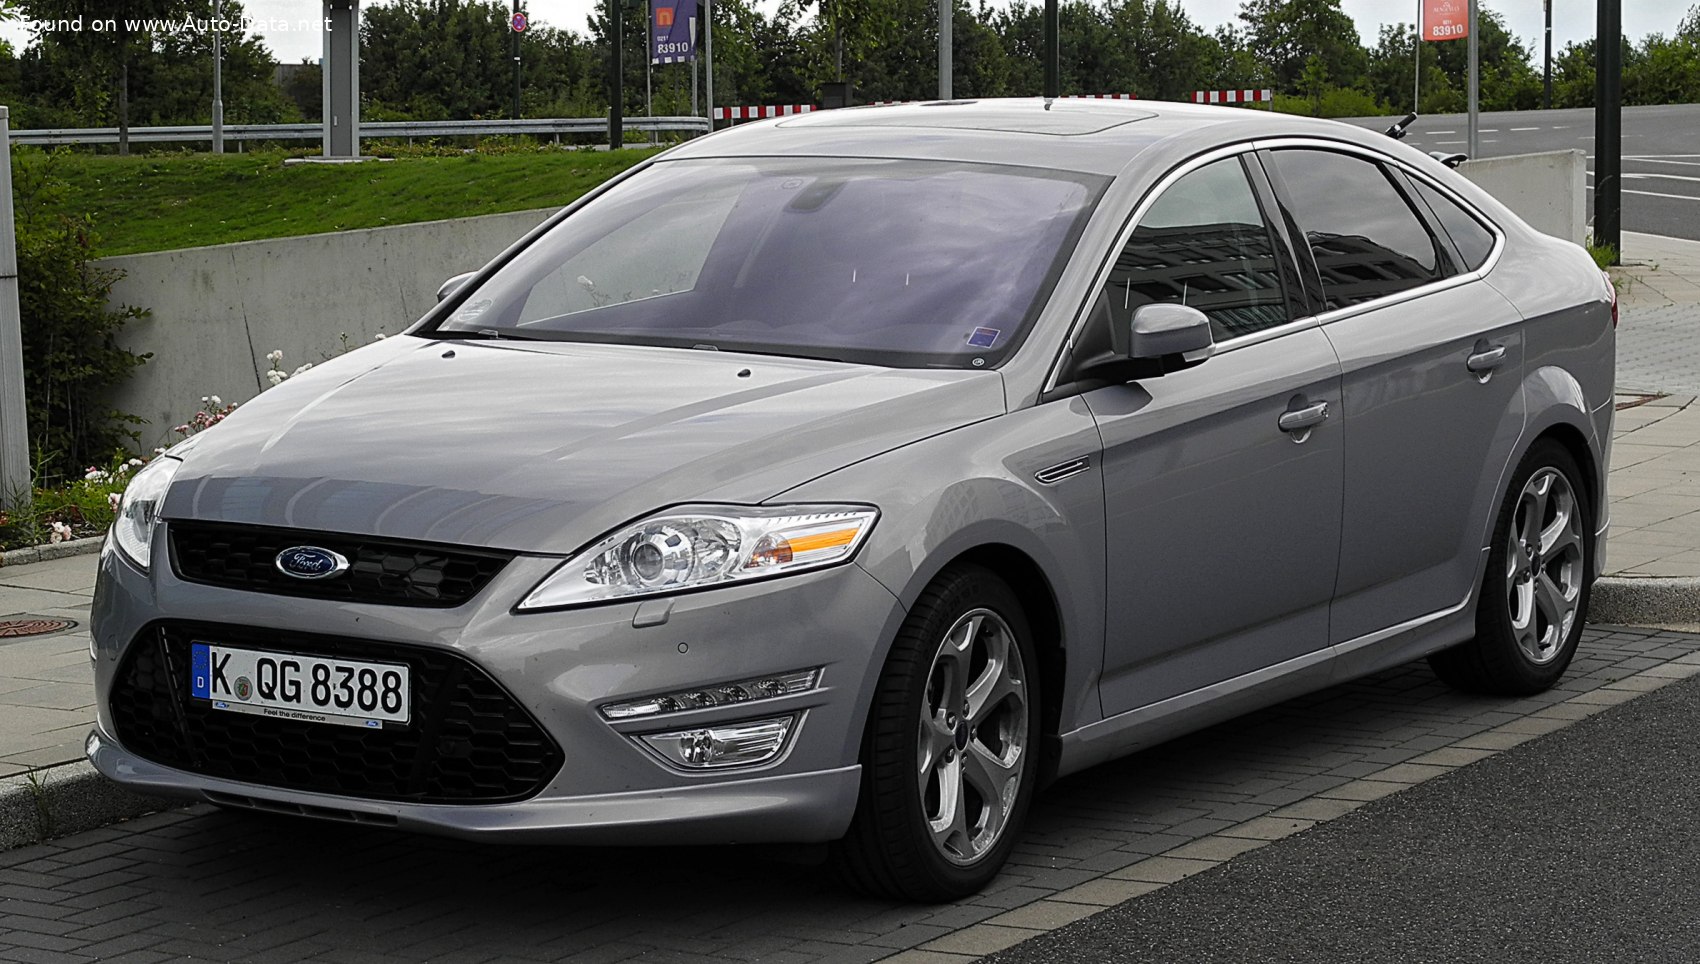 10 Ford Mondeo Iii Hatchback Facelift 10 2 0 Tdci 163 Hp Duratorq Powershift Technical Specs Data Fuel Consumption Dimensions